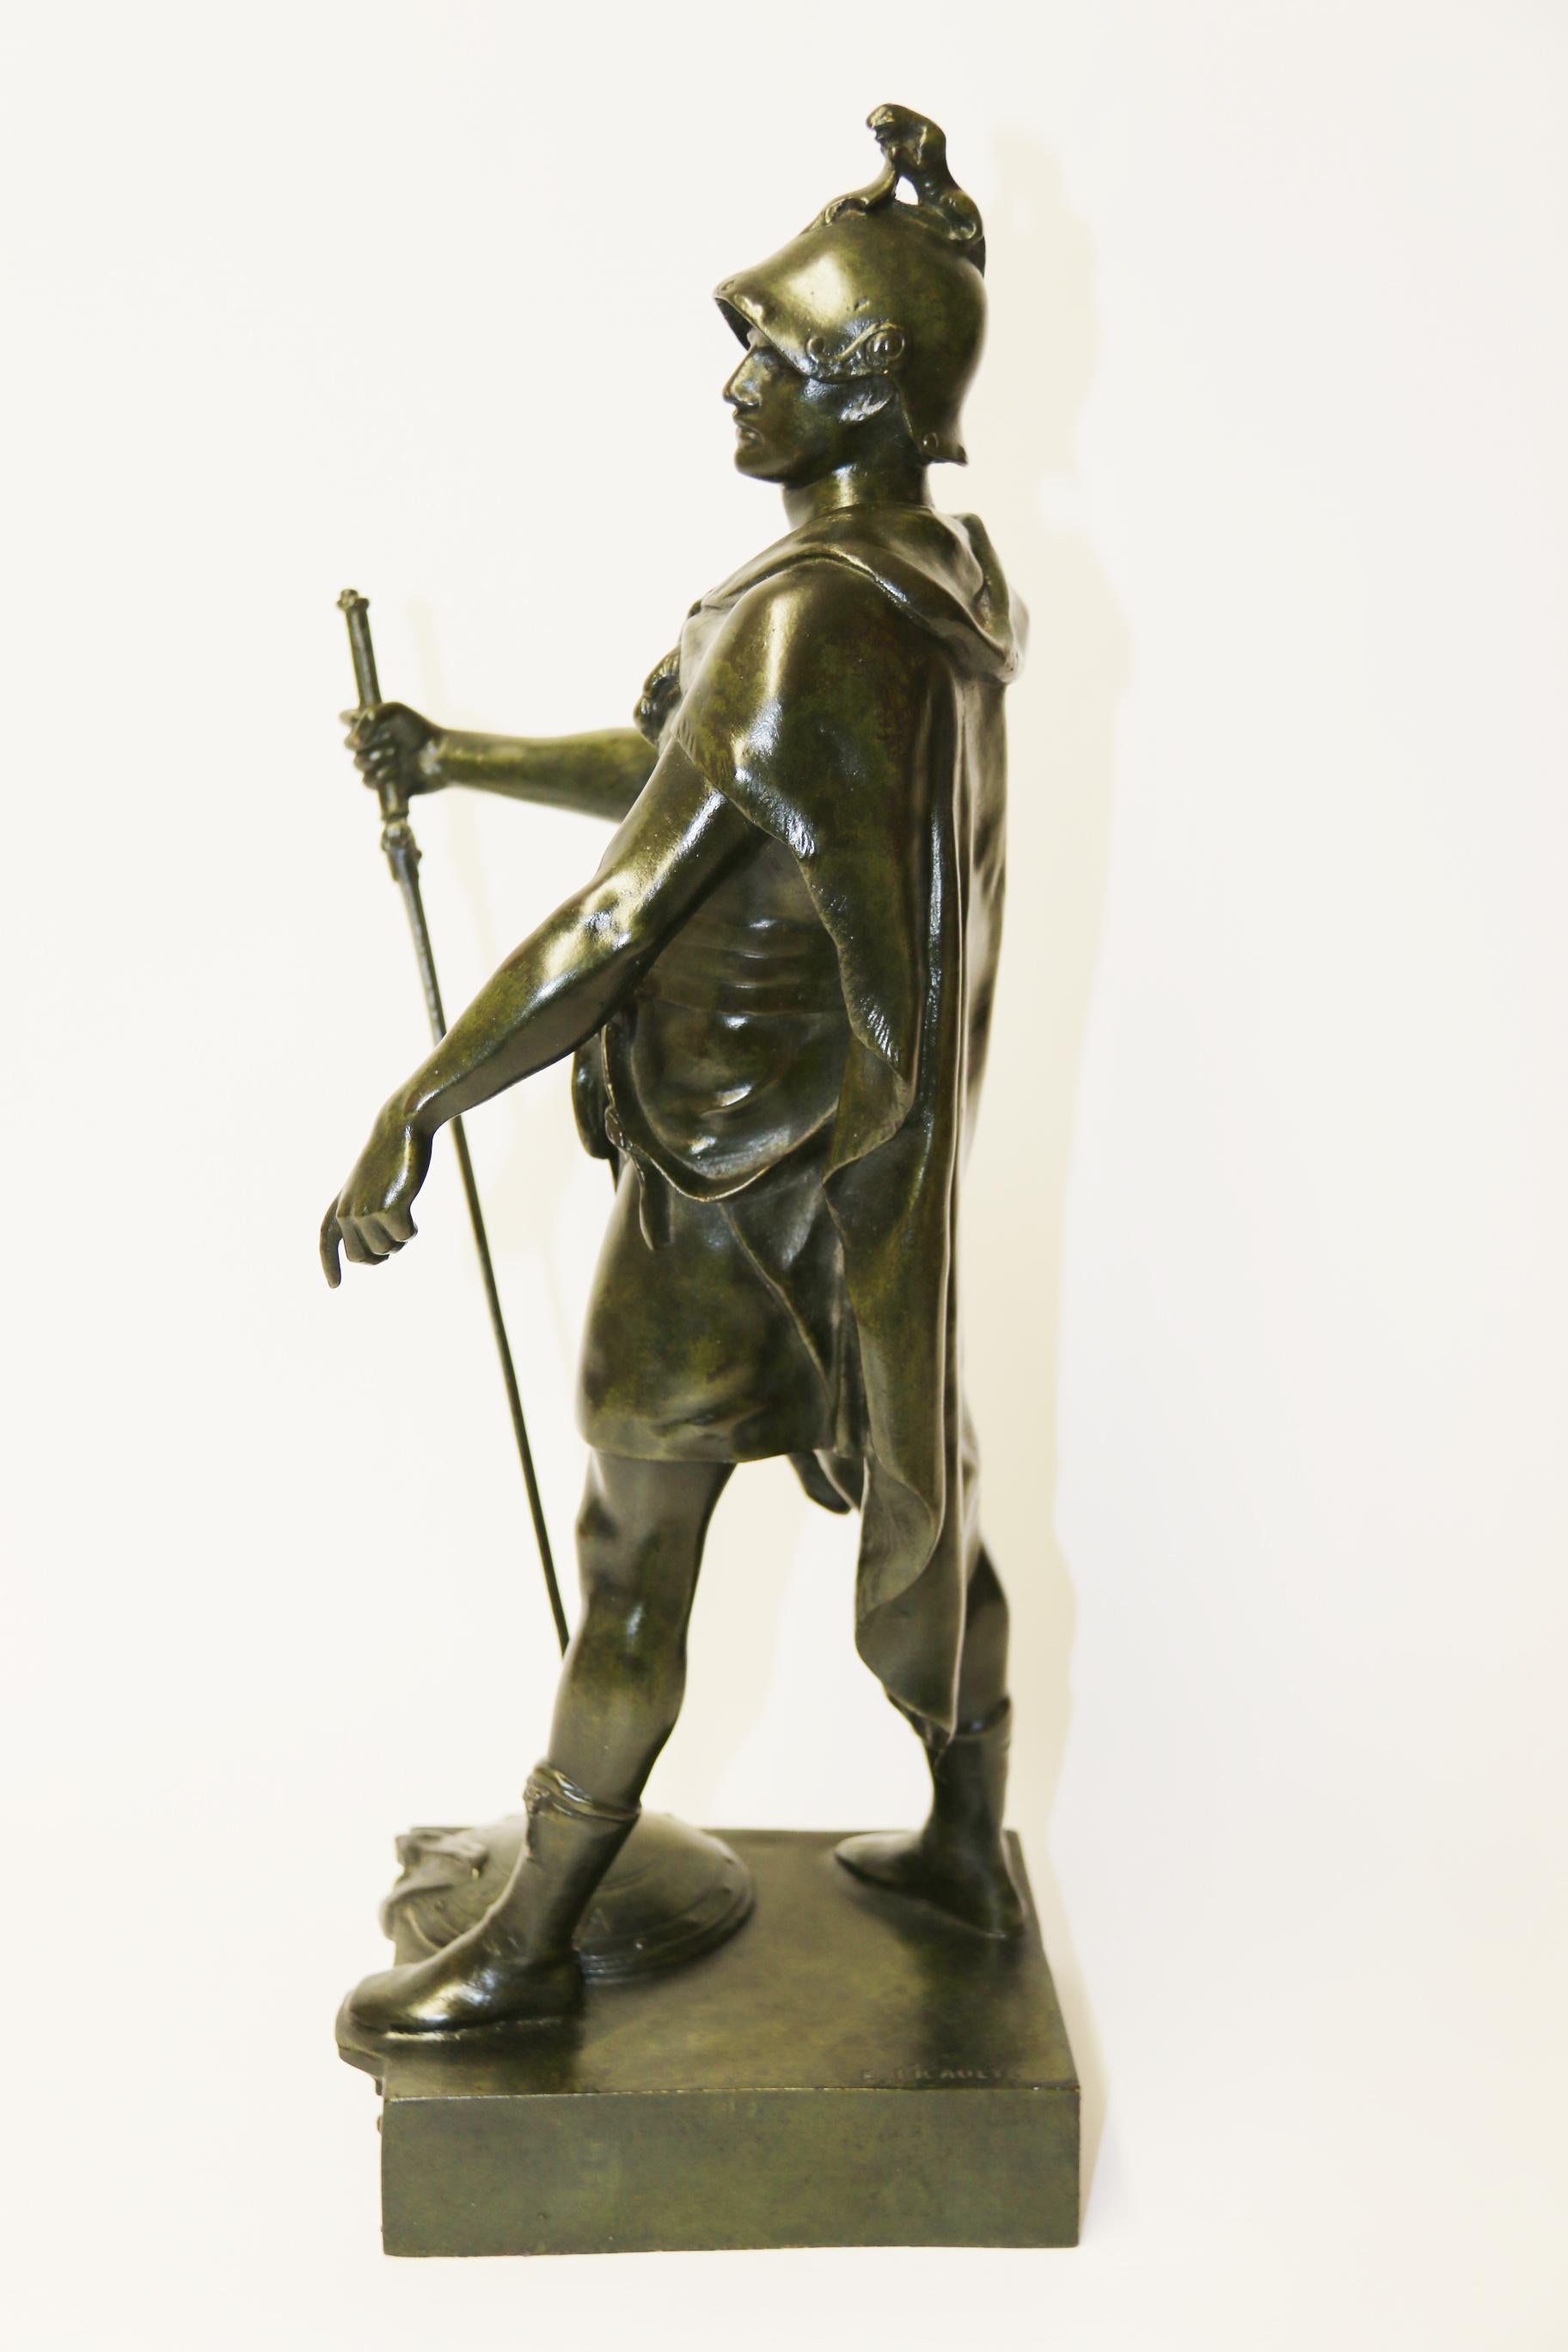 This superbly cast late 19th century bronze figure depicts a standing soldier with sword in hand resting with the tip onto a shield at his feet with the inscribed words Honor Patria.
This bronze figure stands on a plinth base with a brass title